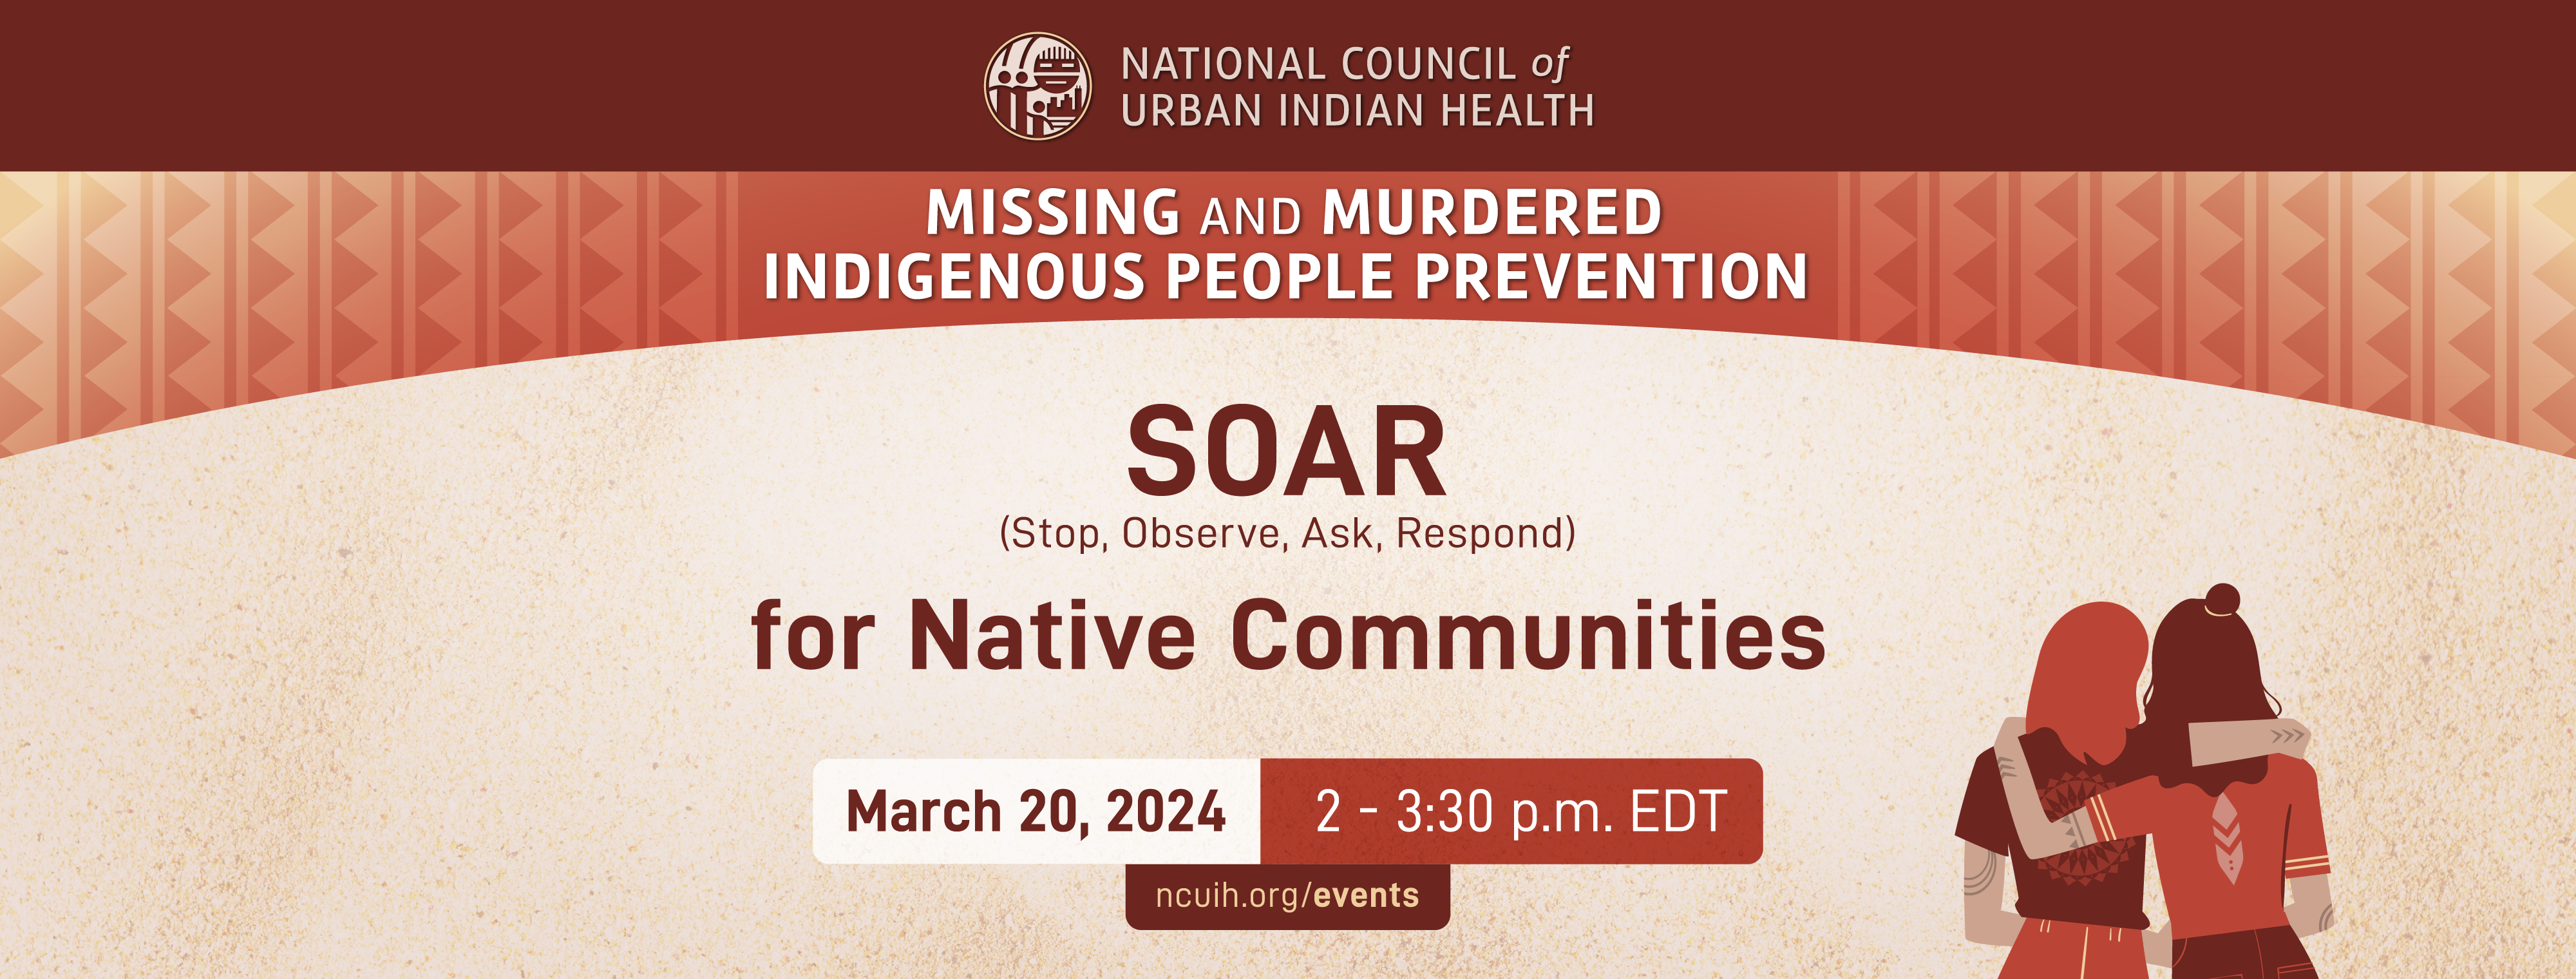 Missing and Murdered Indigenous People Prevention: SOAR for Native Communities